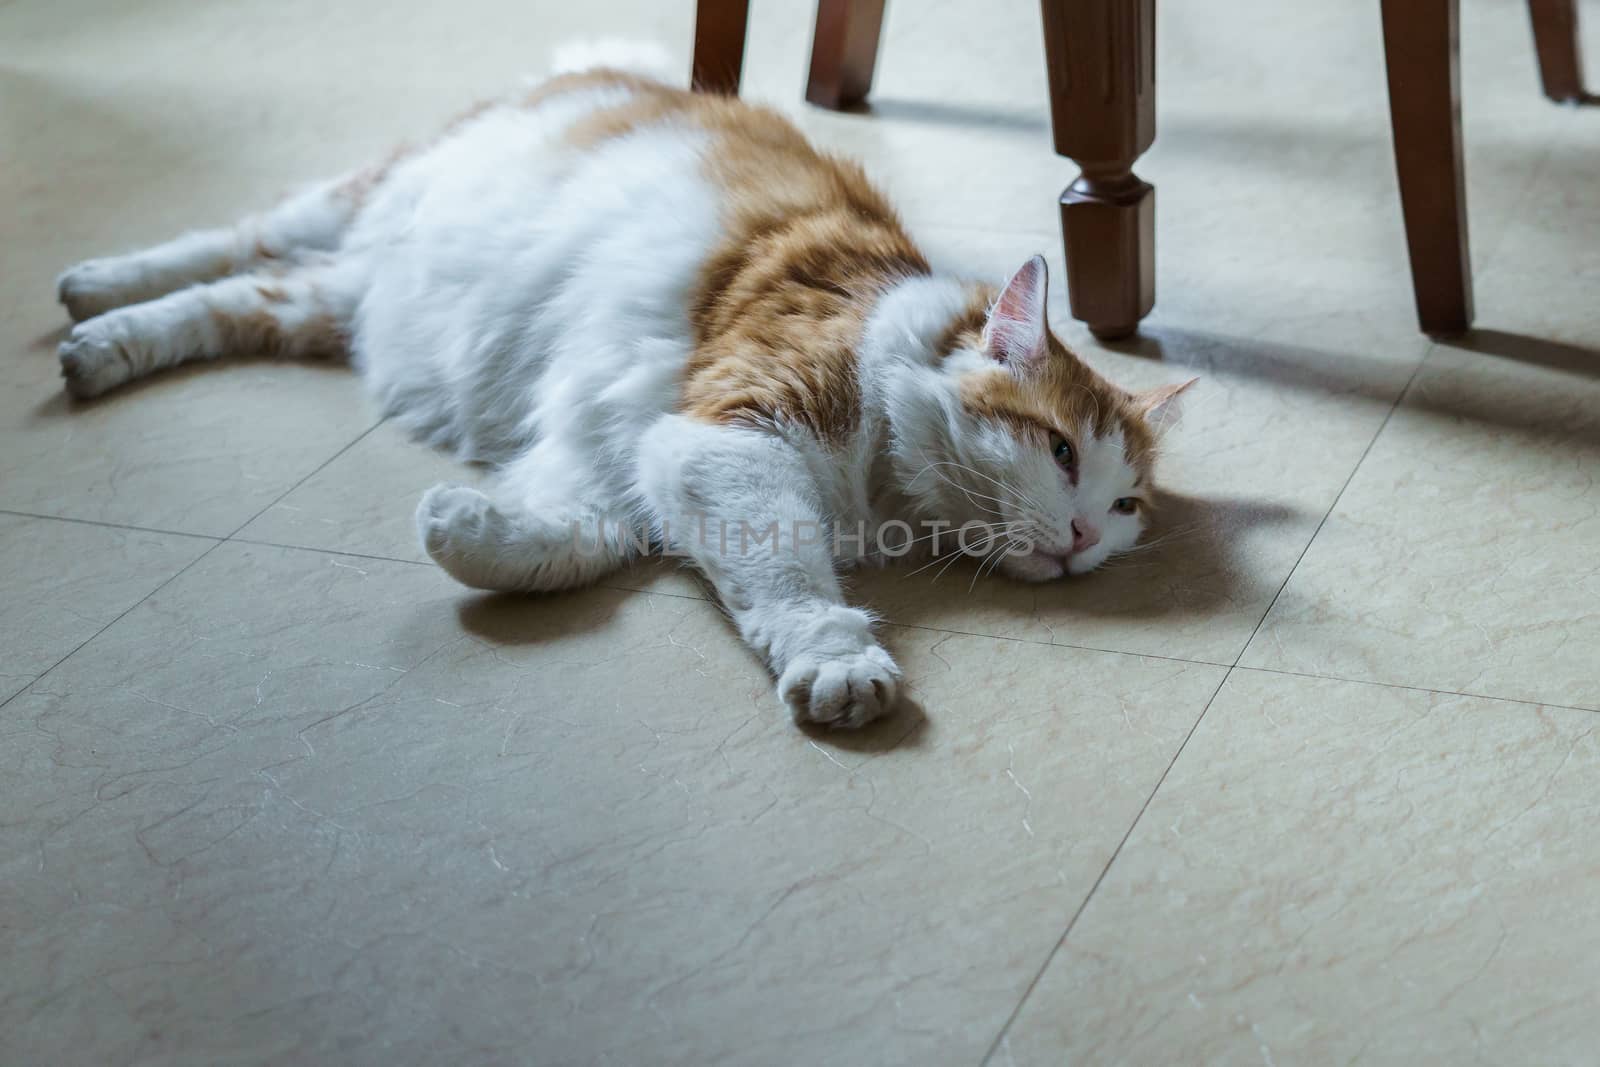 lazy white-red cat lying on the floor